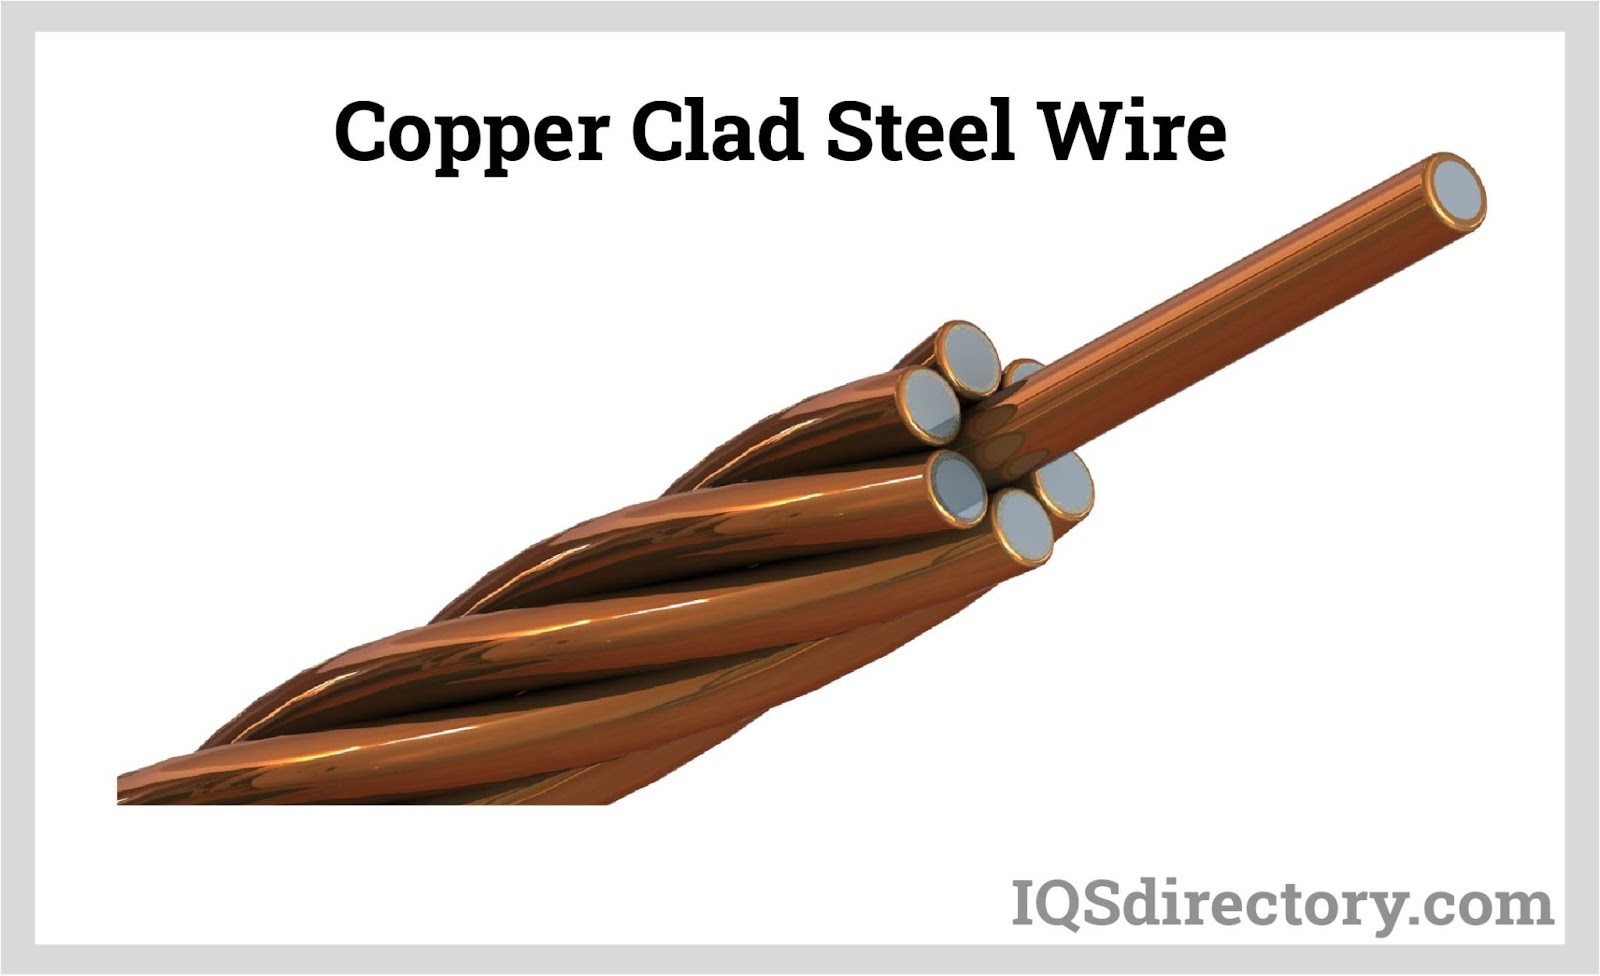 Copper-Clad Steel Wire